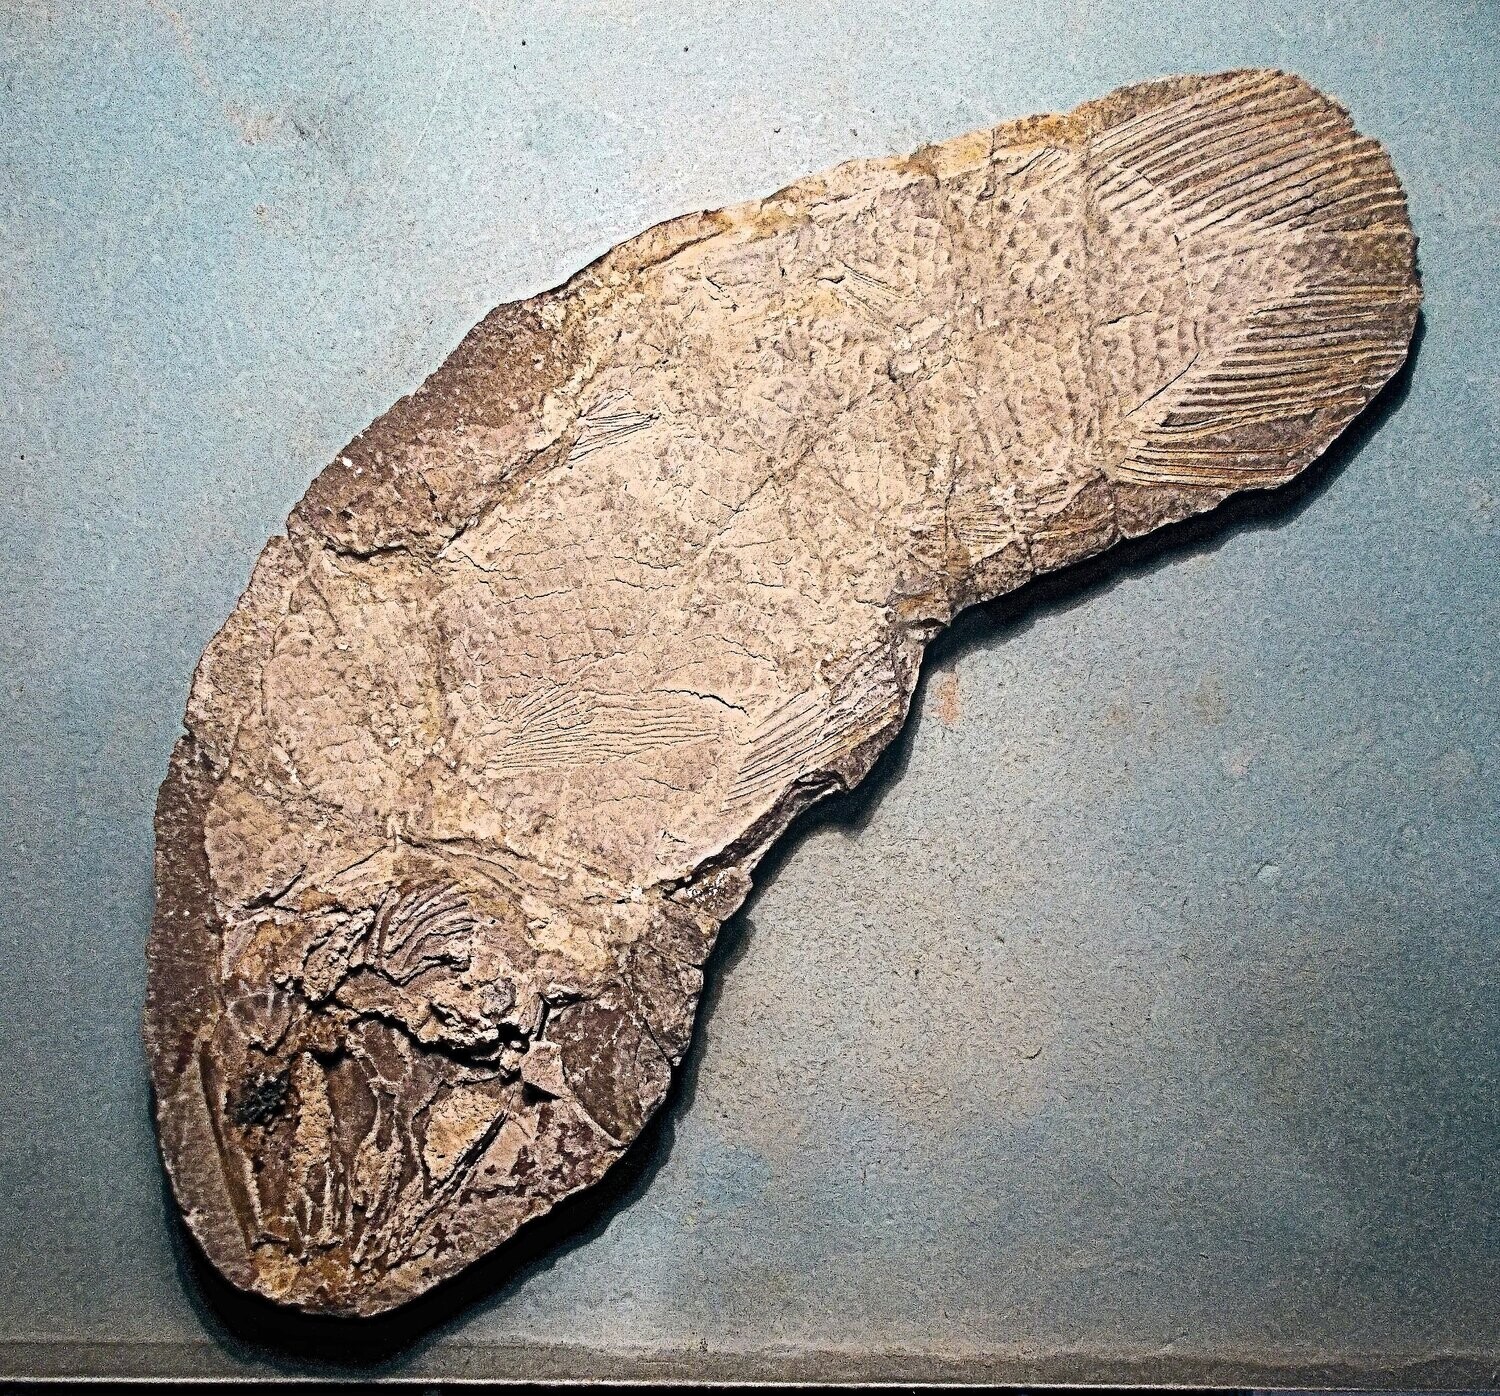 Beautiful complete and large 23.5cm Coelocanth Whitea woodwardi from Triassic of Madagascar